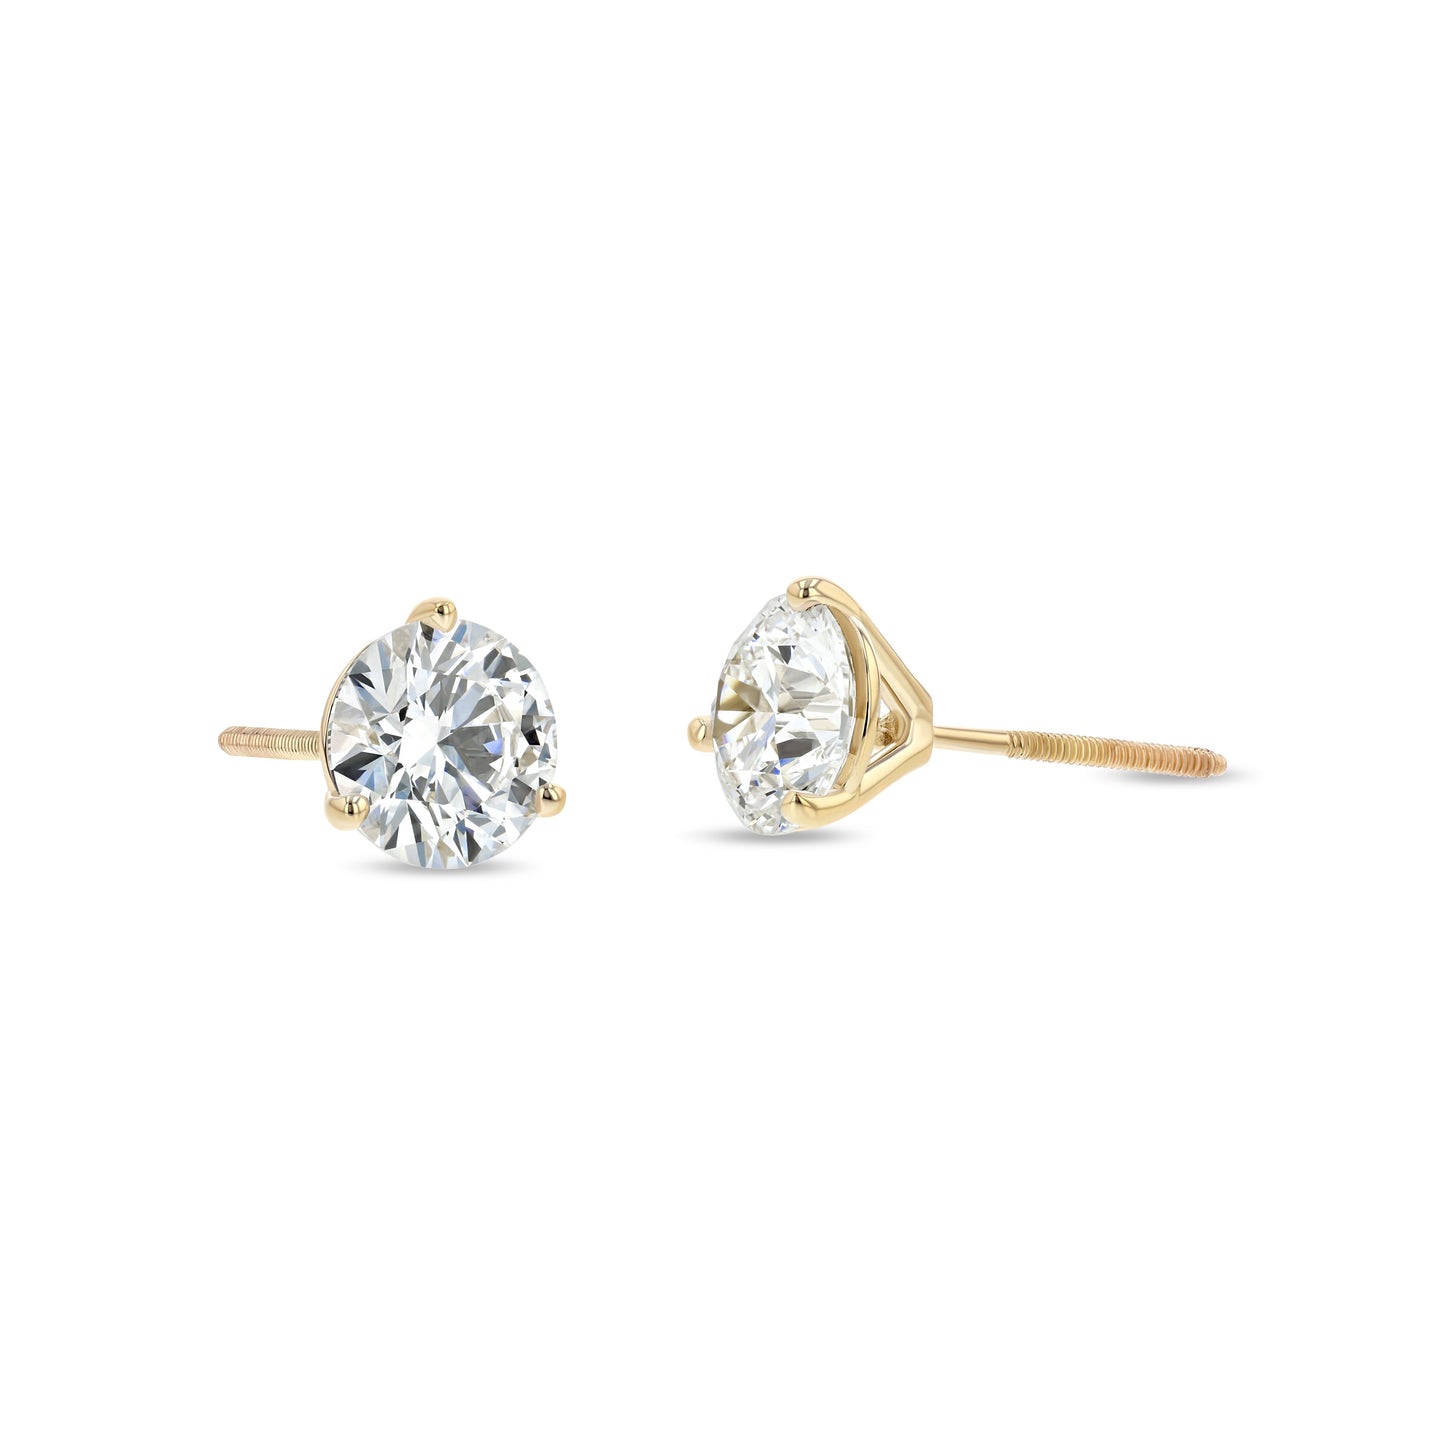 14k Yellow Gold 3-prong Martini Round Diamond Stud Earrings 1ctw (5.0mm Ea), G Color, Si3 Clarity